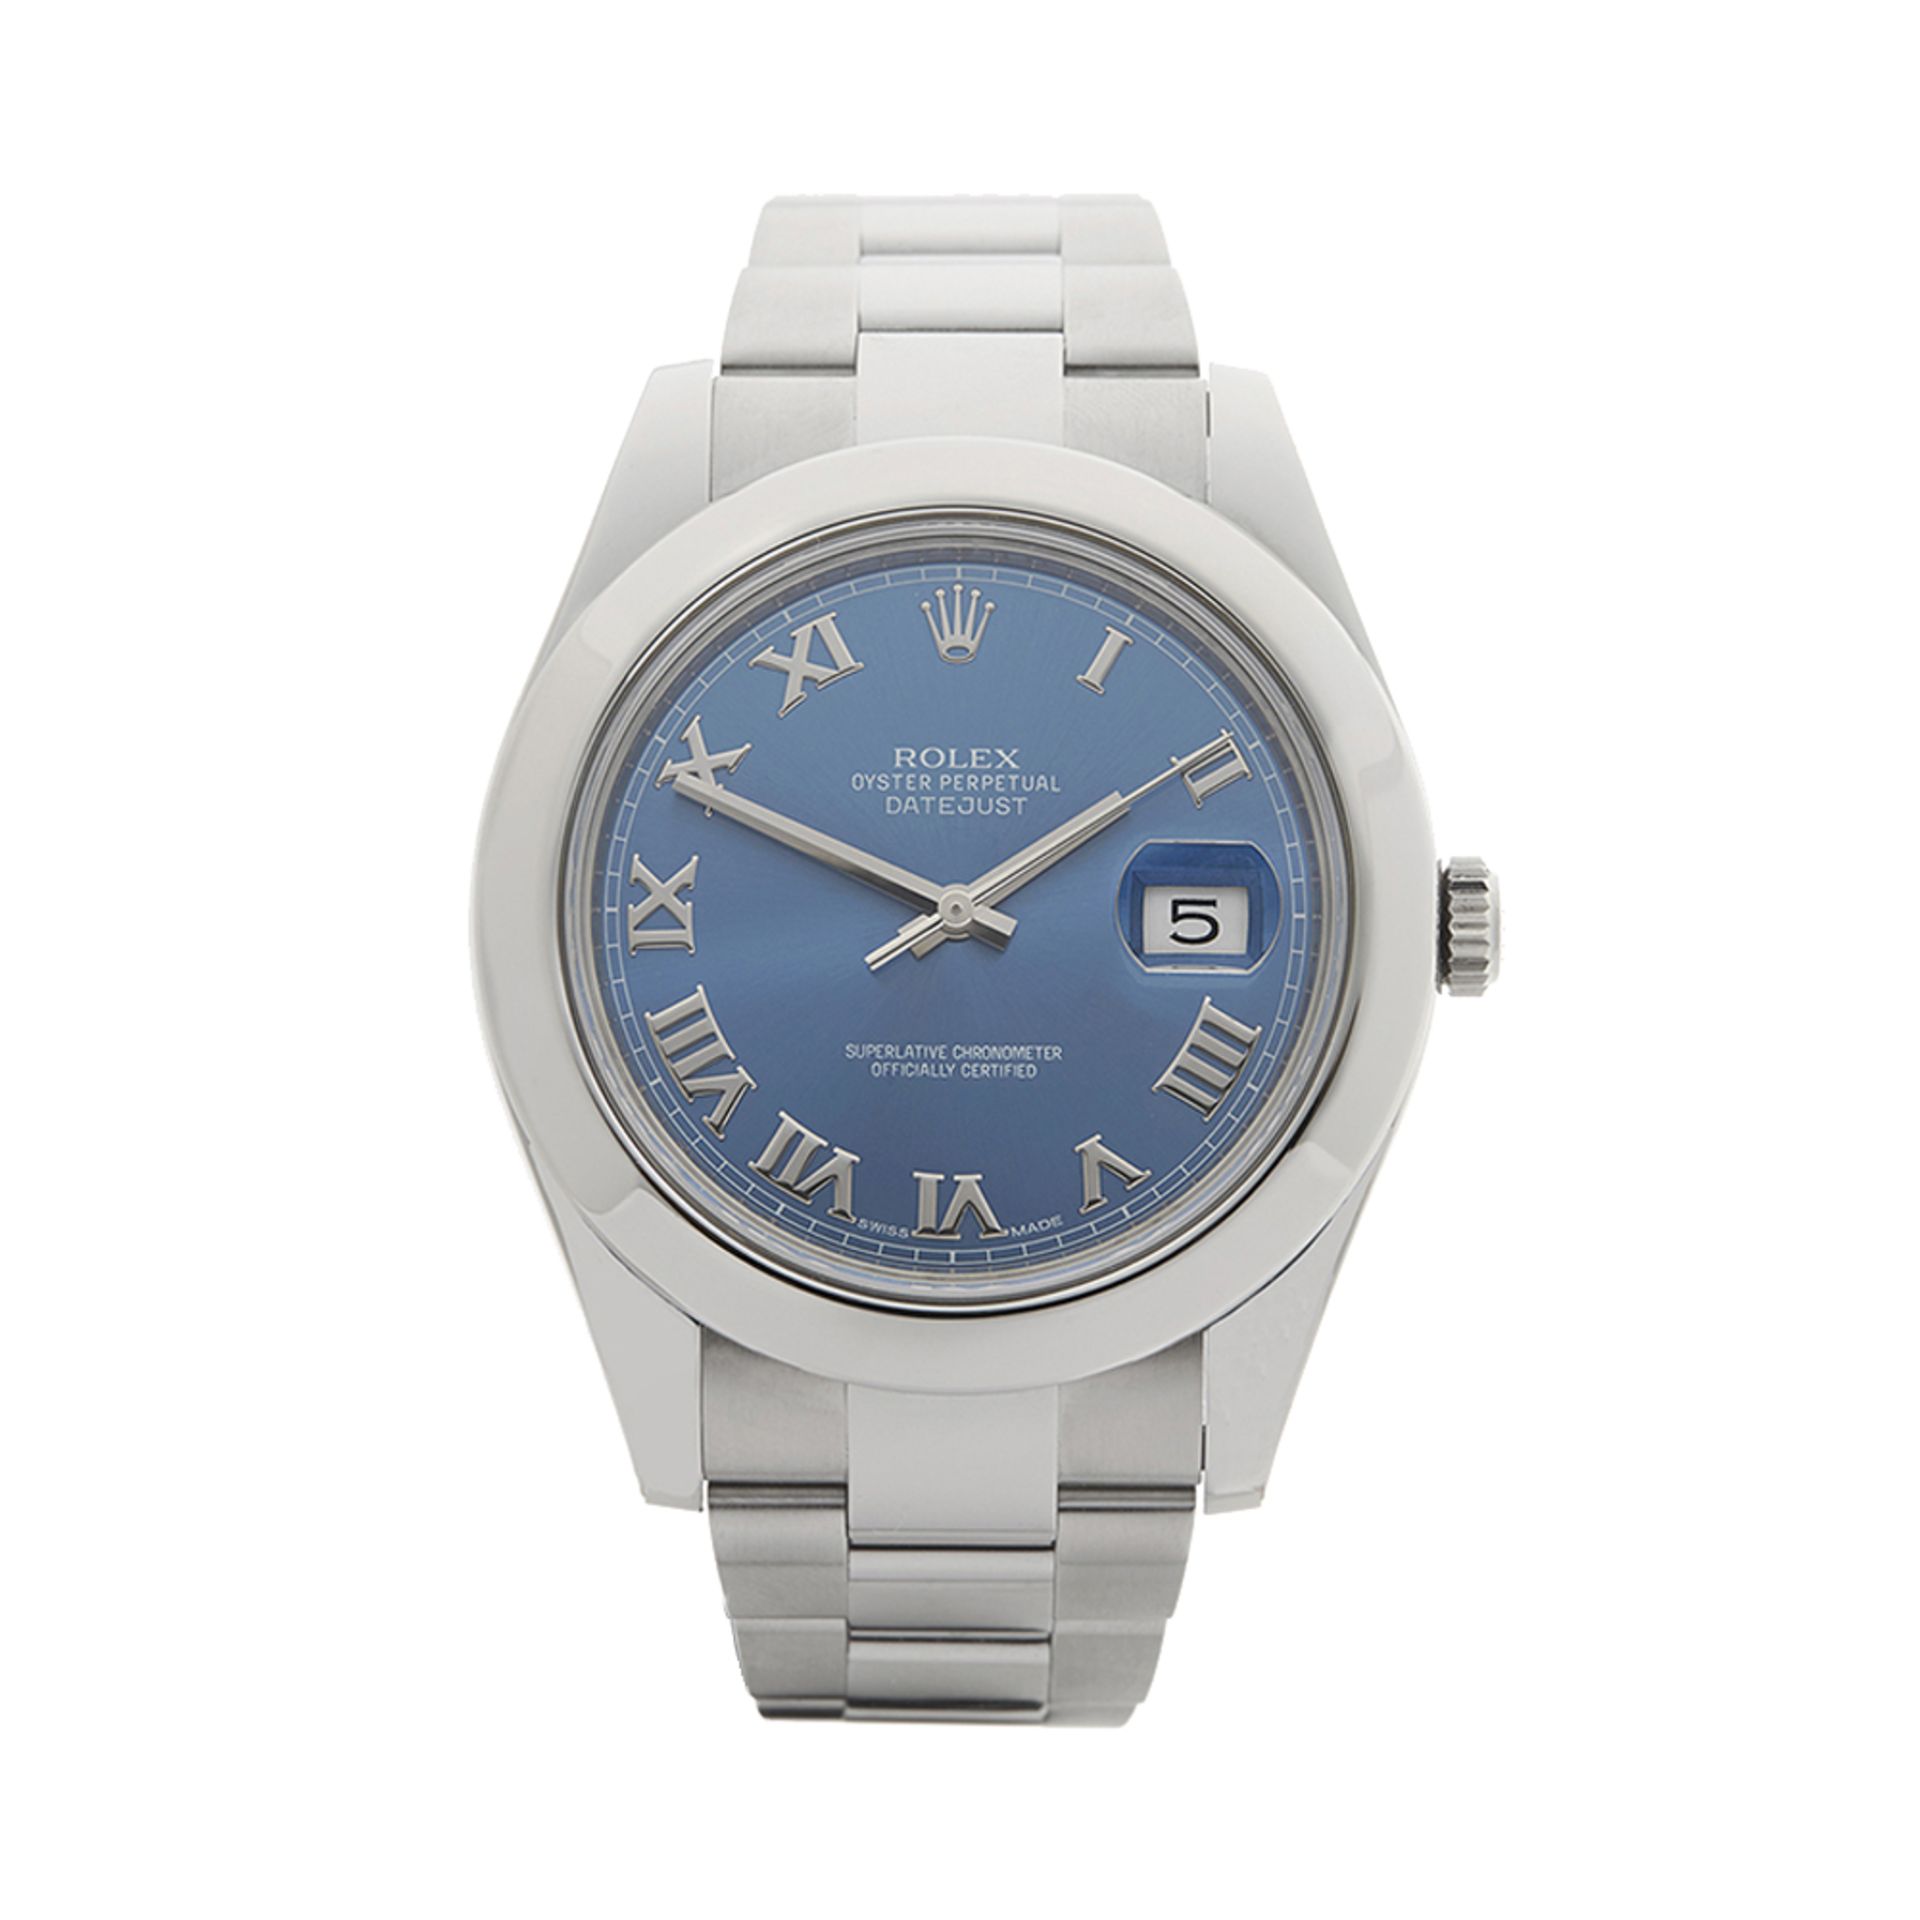 Datejust II 41mm Stainless Steel - 116300 - Image 2 of 9